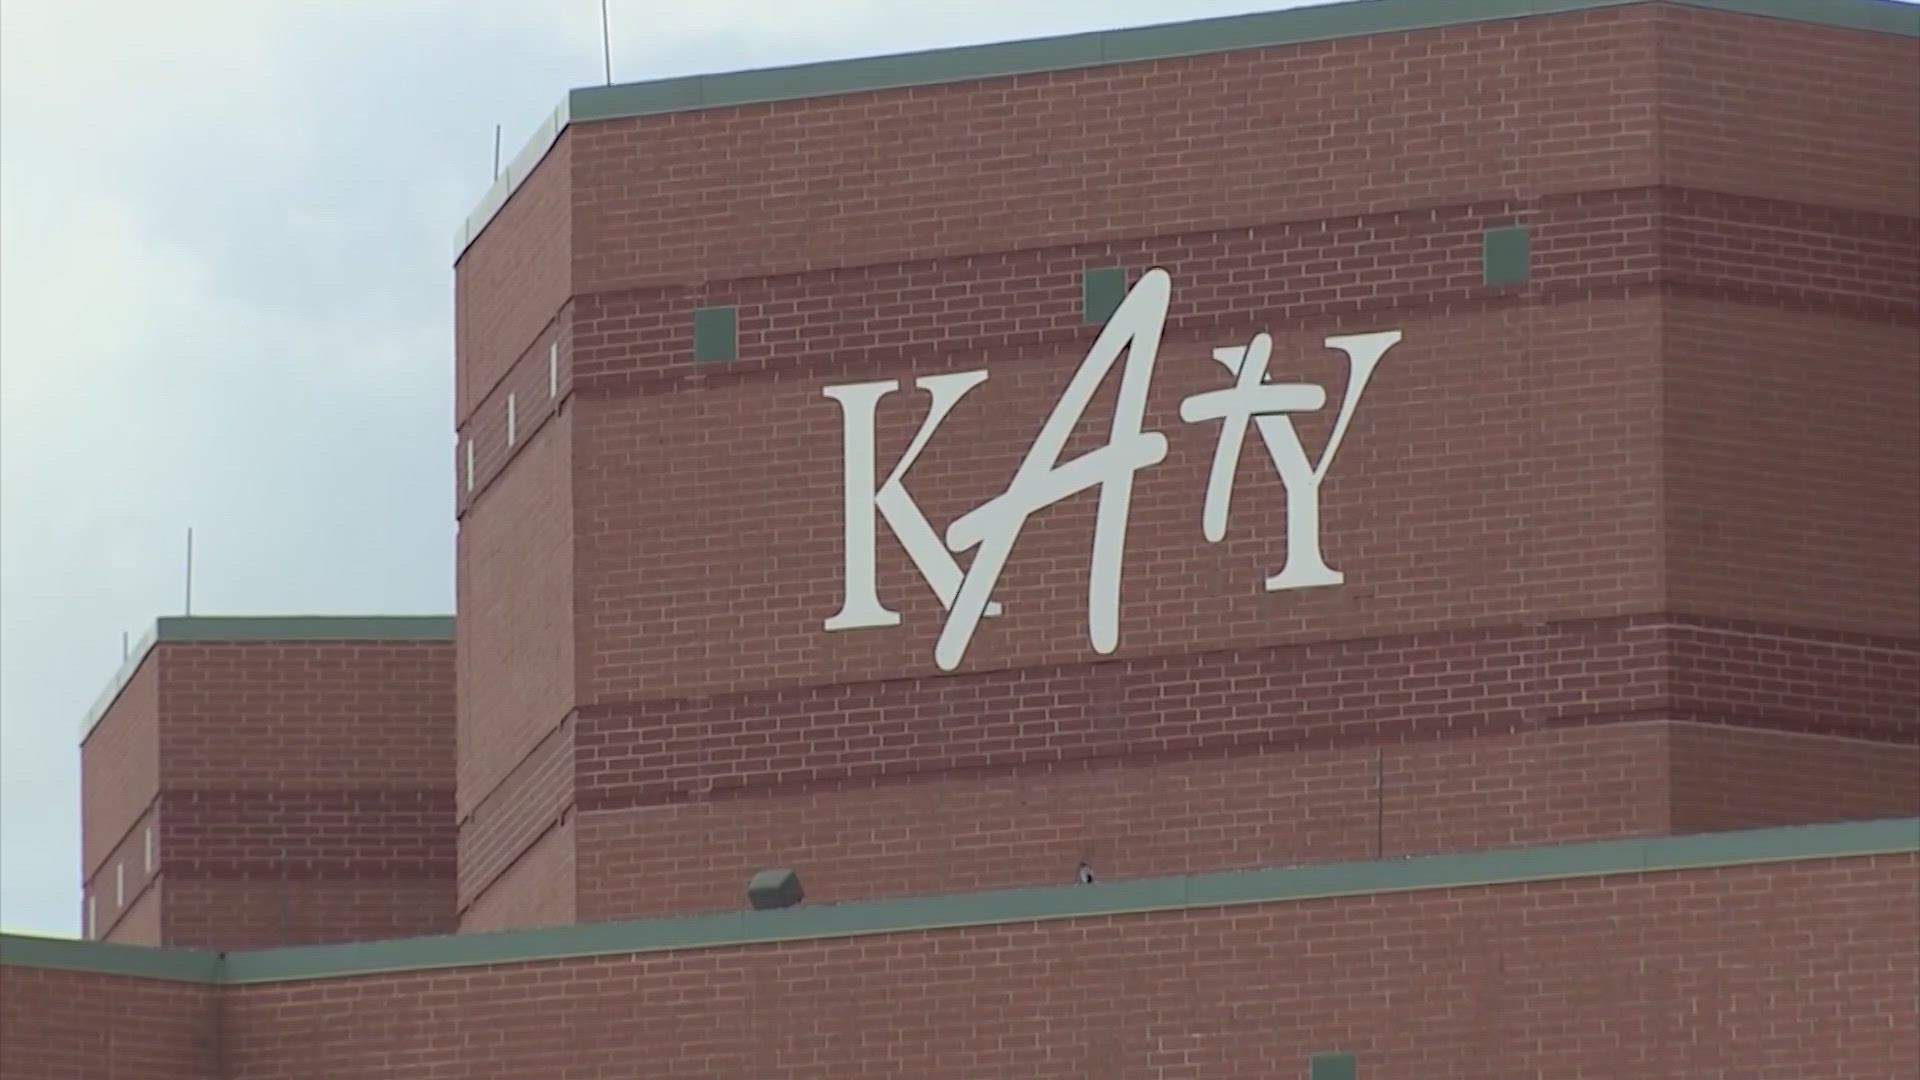 A concerned parent found inappropriate Instagram messages that were sent to her special needs daughter from a teacher at Katy ISD.